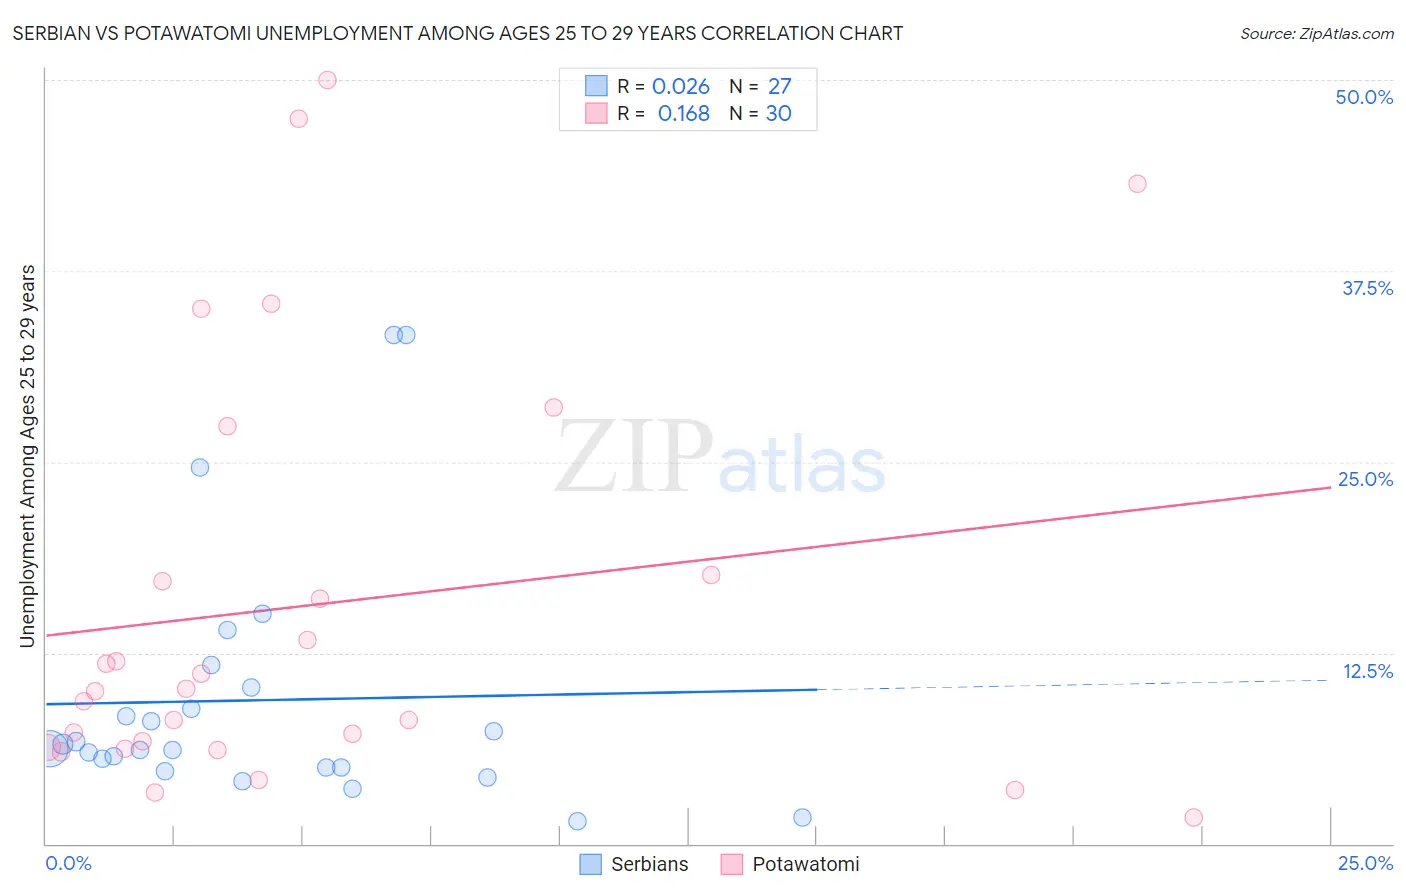 Serbian vs Potawatomi Unemployment Among Ages 25 to 29 years